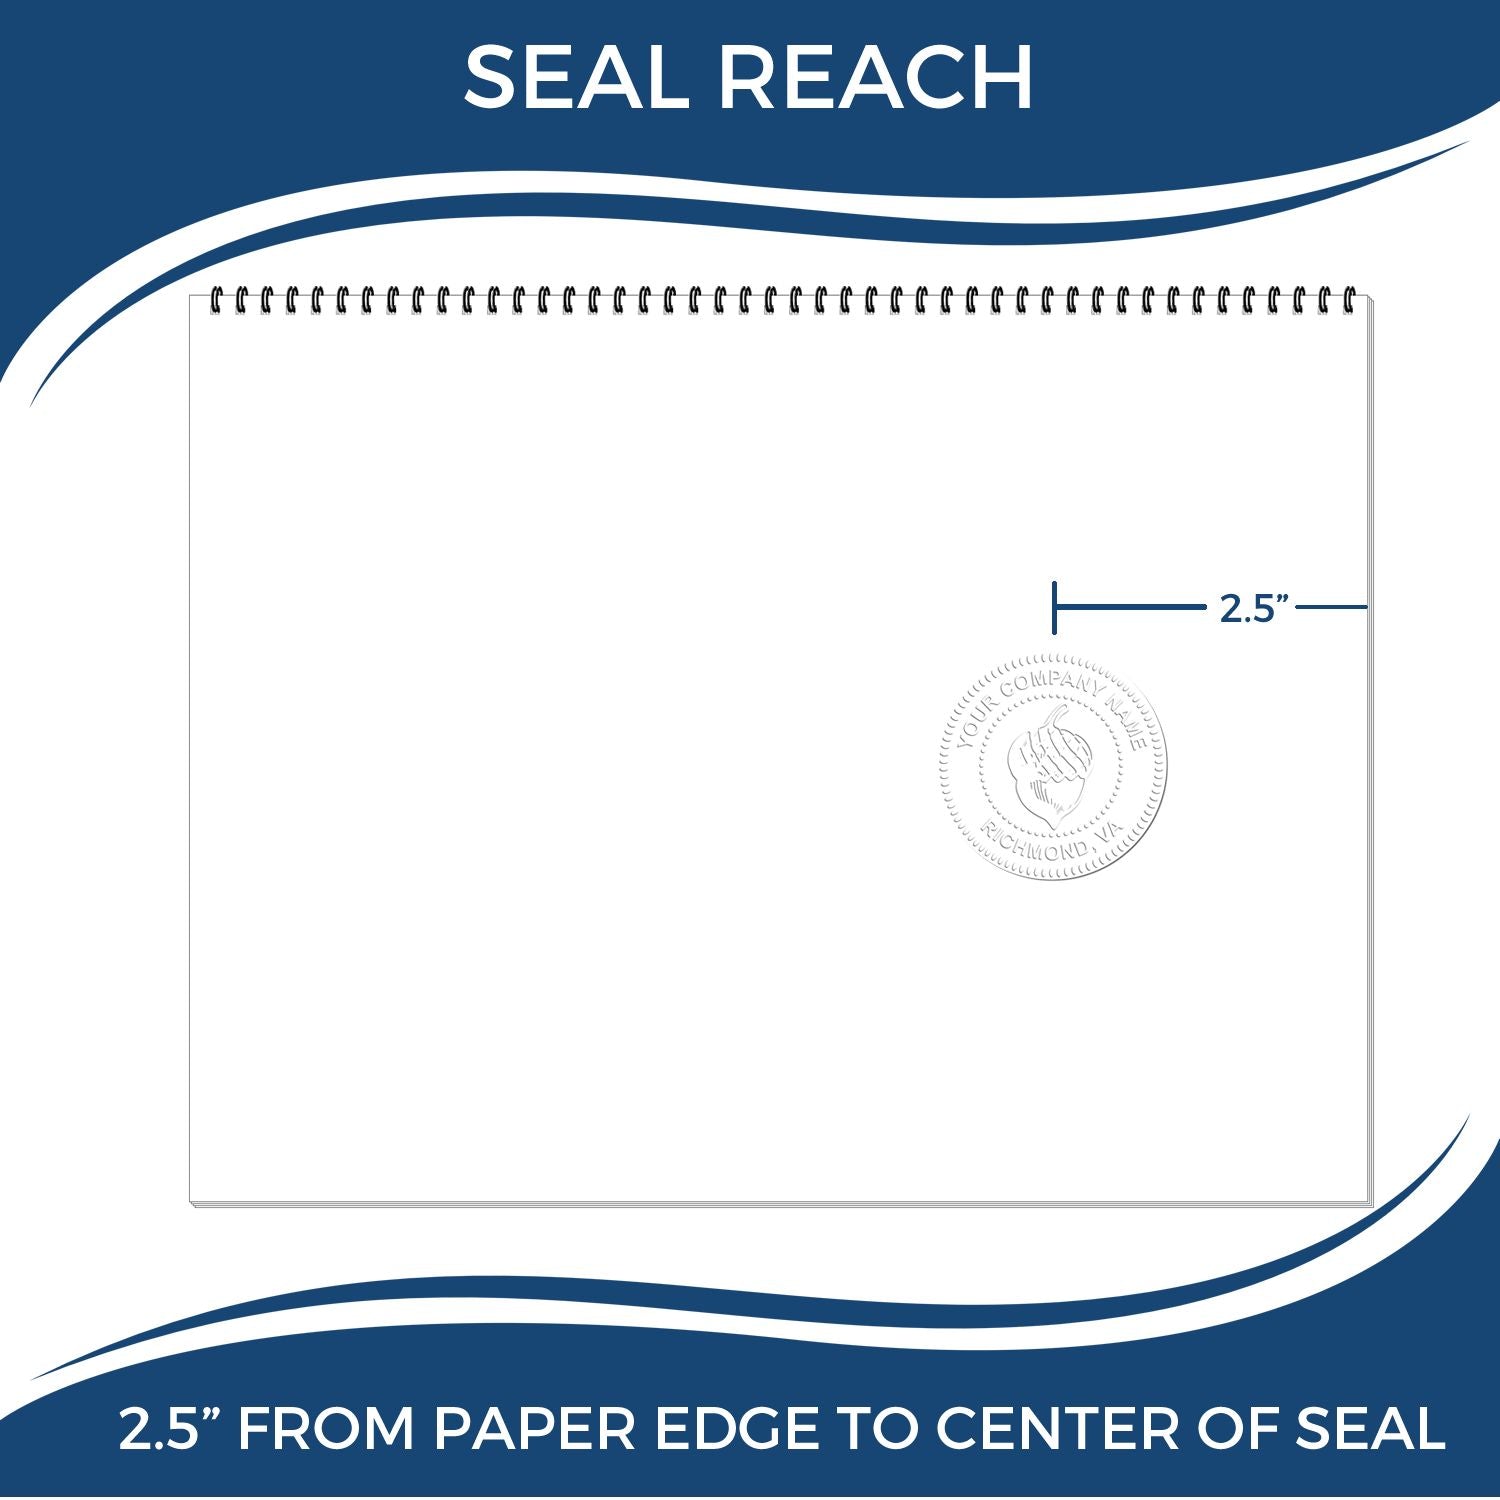 An infographic showing the seal reach which is represented by a ruler and a miniature seal image of the Long Reach Wisconsin PE Seal